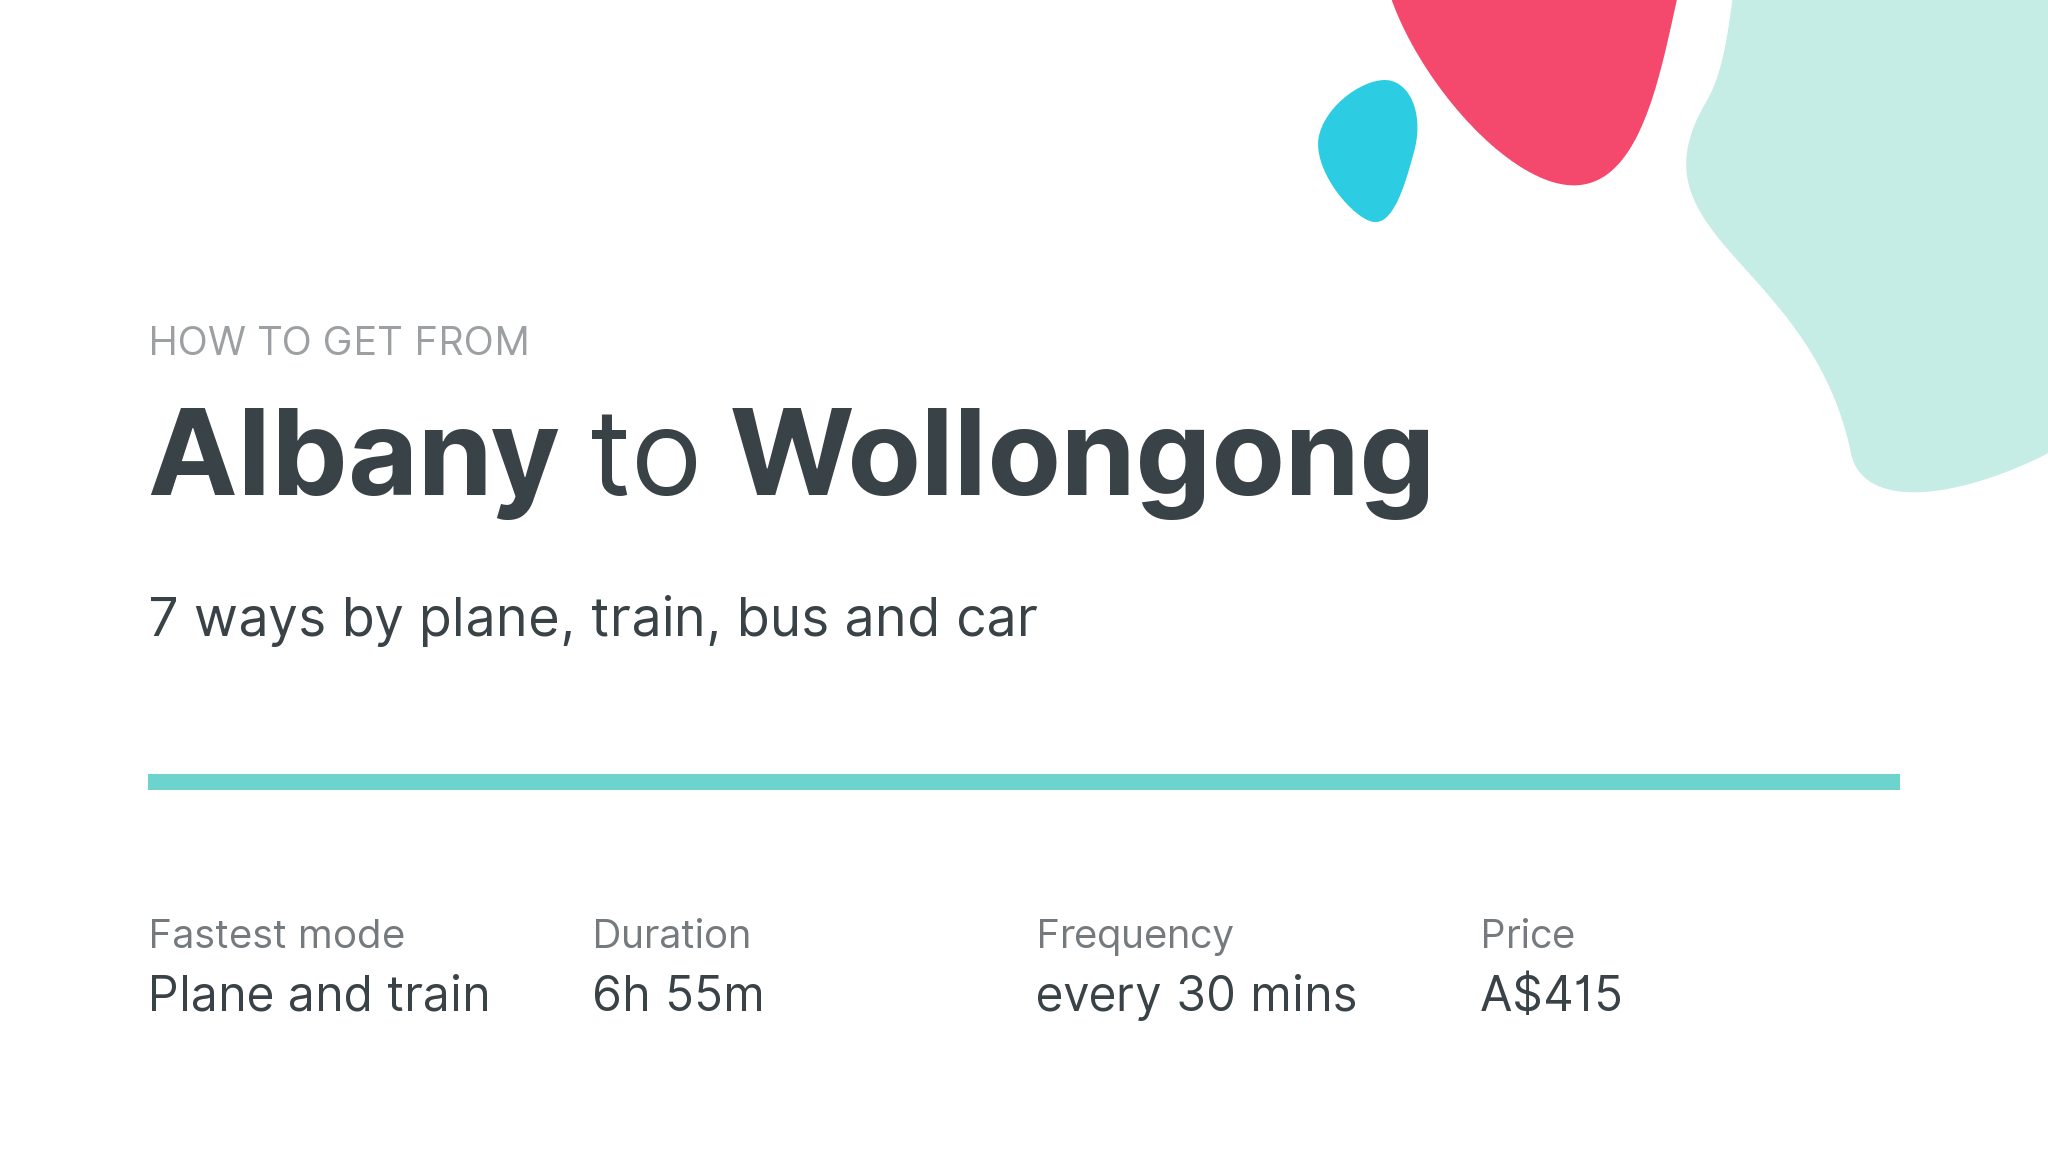 How do I get from Albany to Wollongong